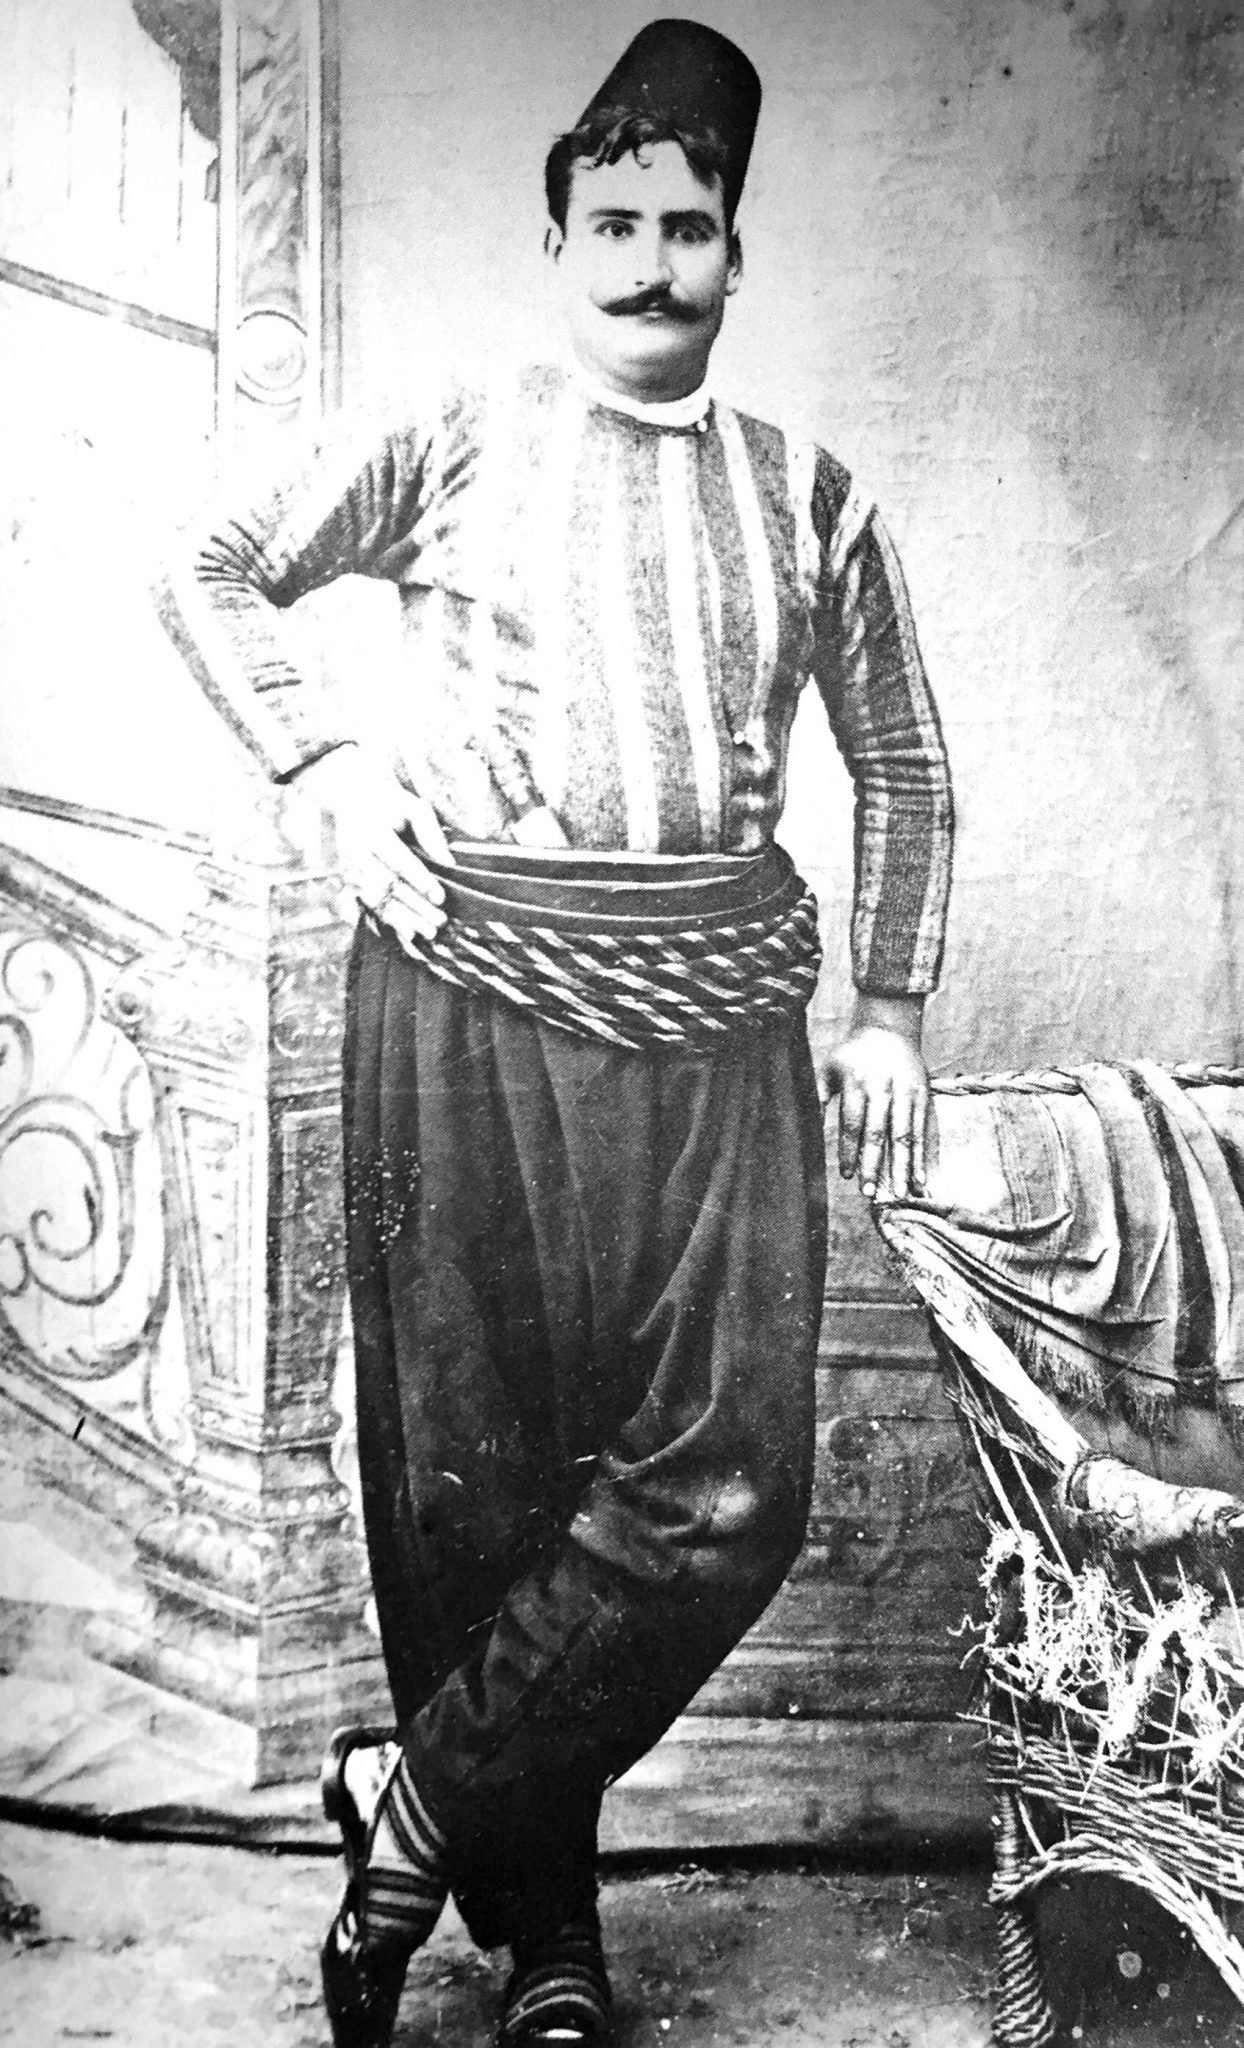 Missak Sarkisian, one of the Armenians who was publicly hanged. Missak, 28, was a butcher who was well known for his beautiful voice (Photo: Mekhitarist Order, San Lassaro, Venice, Italy)